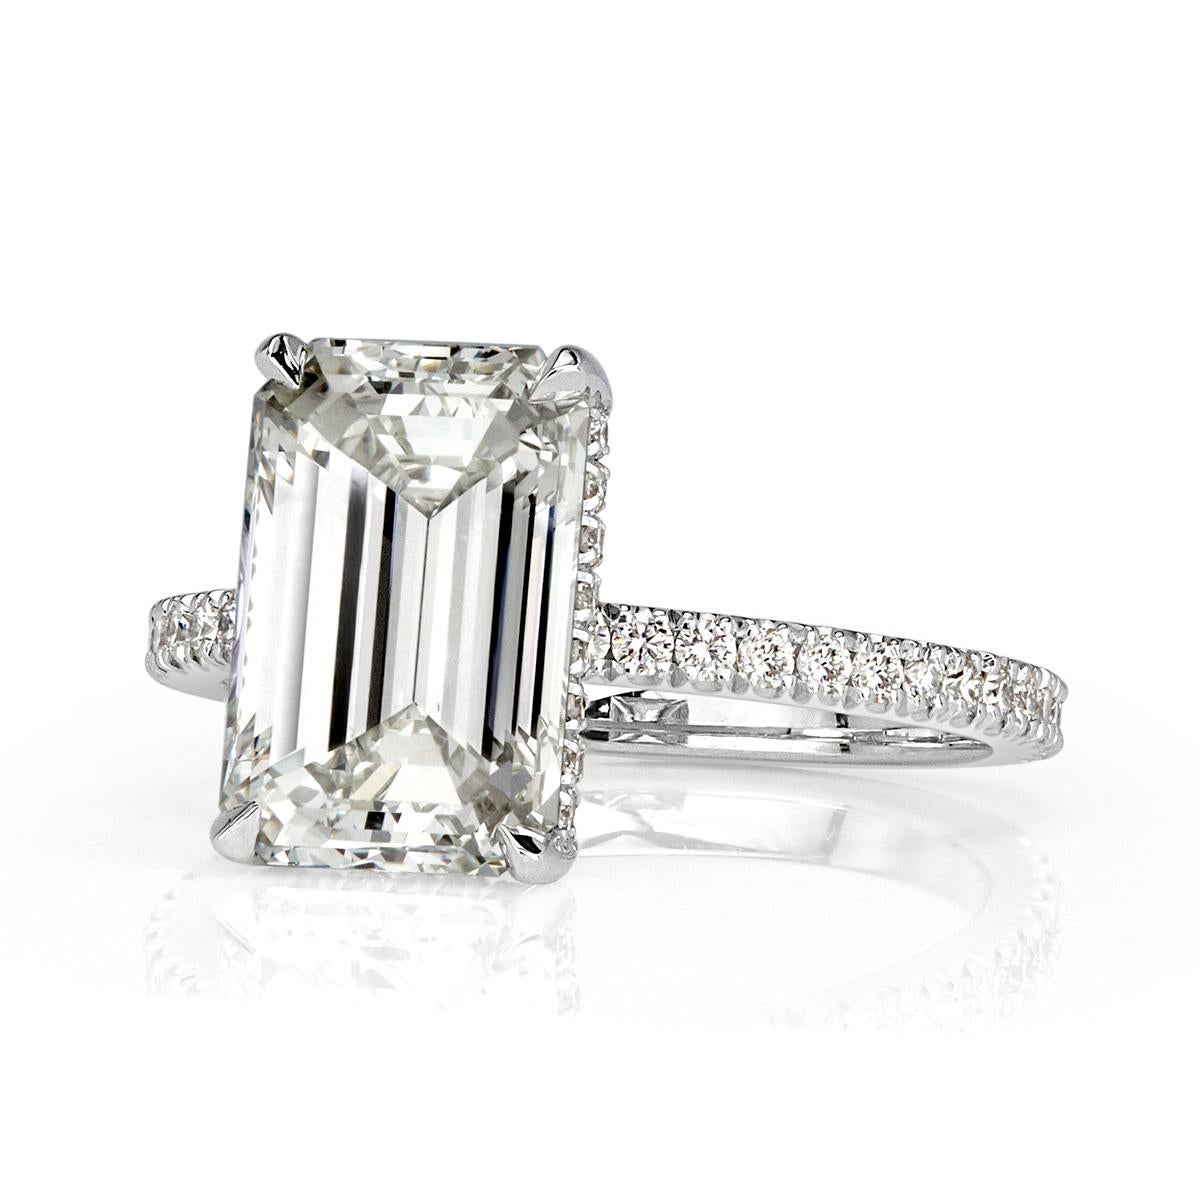 Absolutely gorgeous from every angle, this stuning diamond engagement ring features a superb 4.30ct emerald cut center diamond, GIA certified at I in color, VVS2 in clarity. It has exceptional measurements of 11.06 x 8.00mm and is graded at